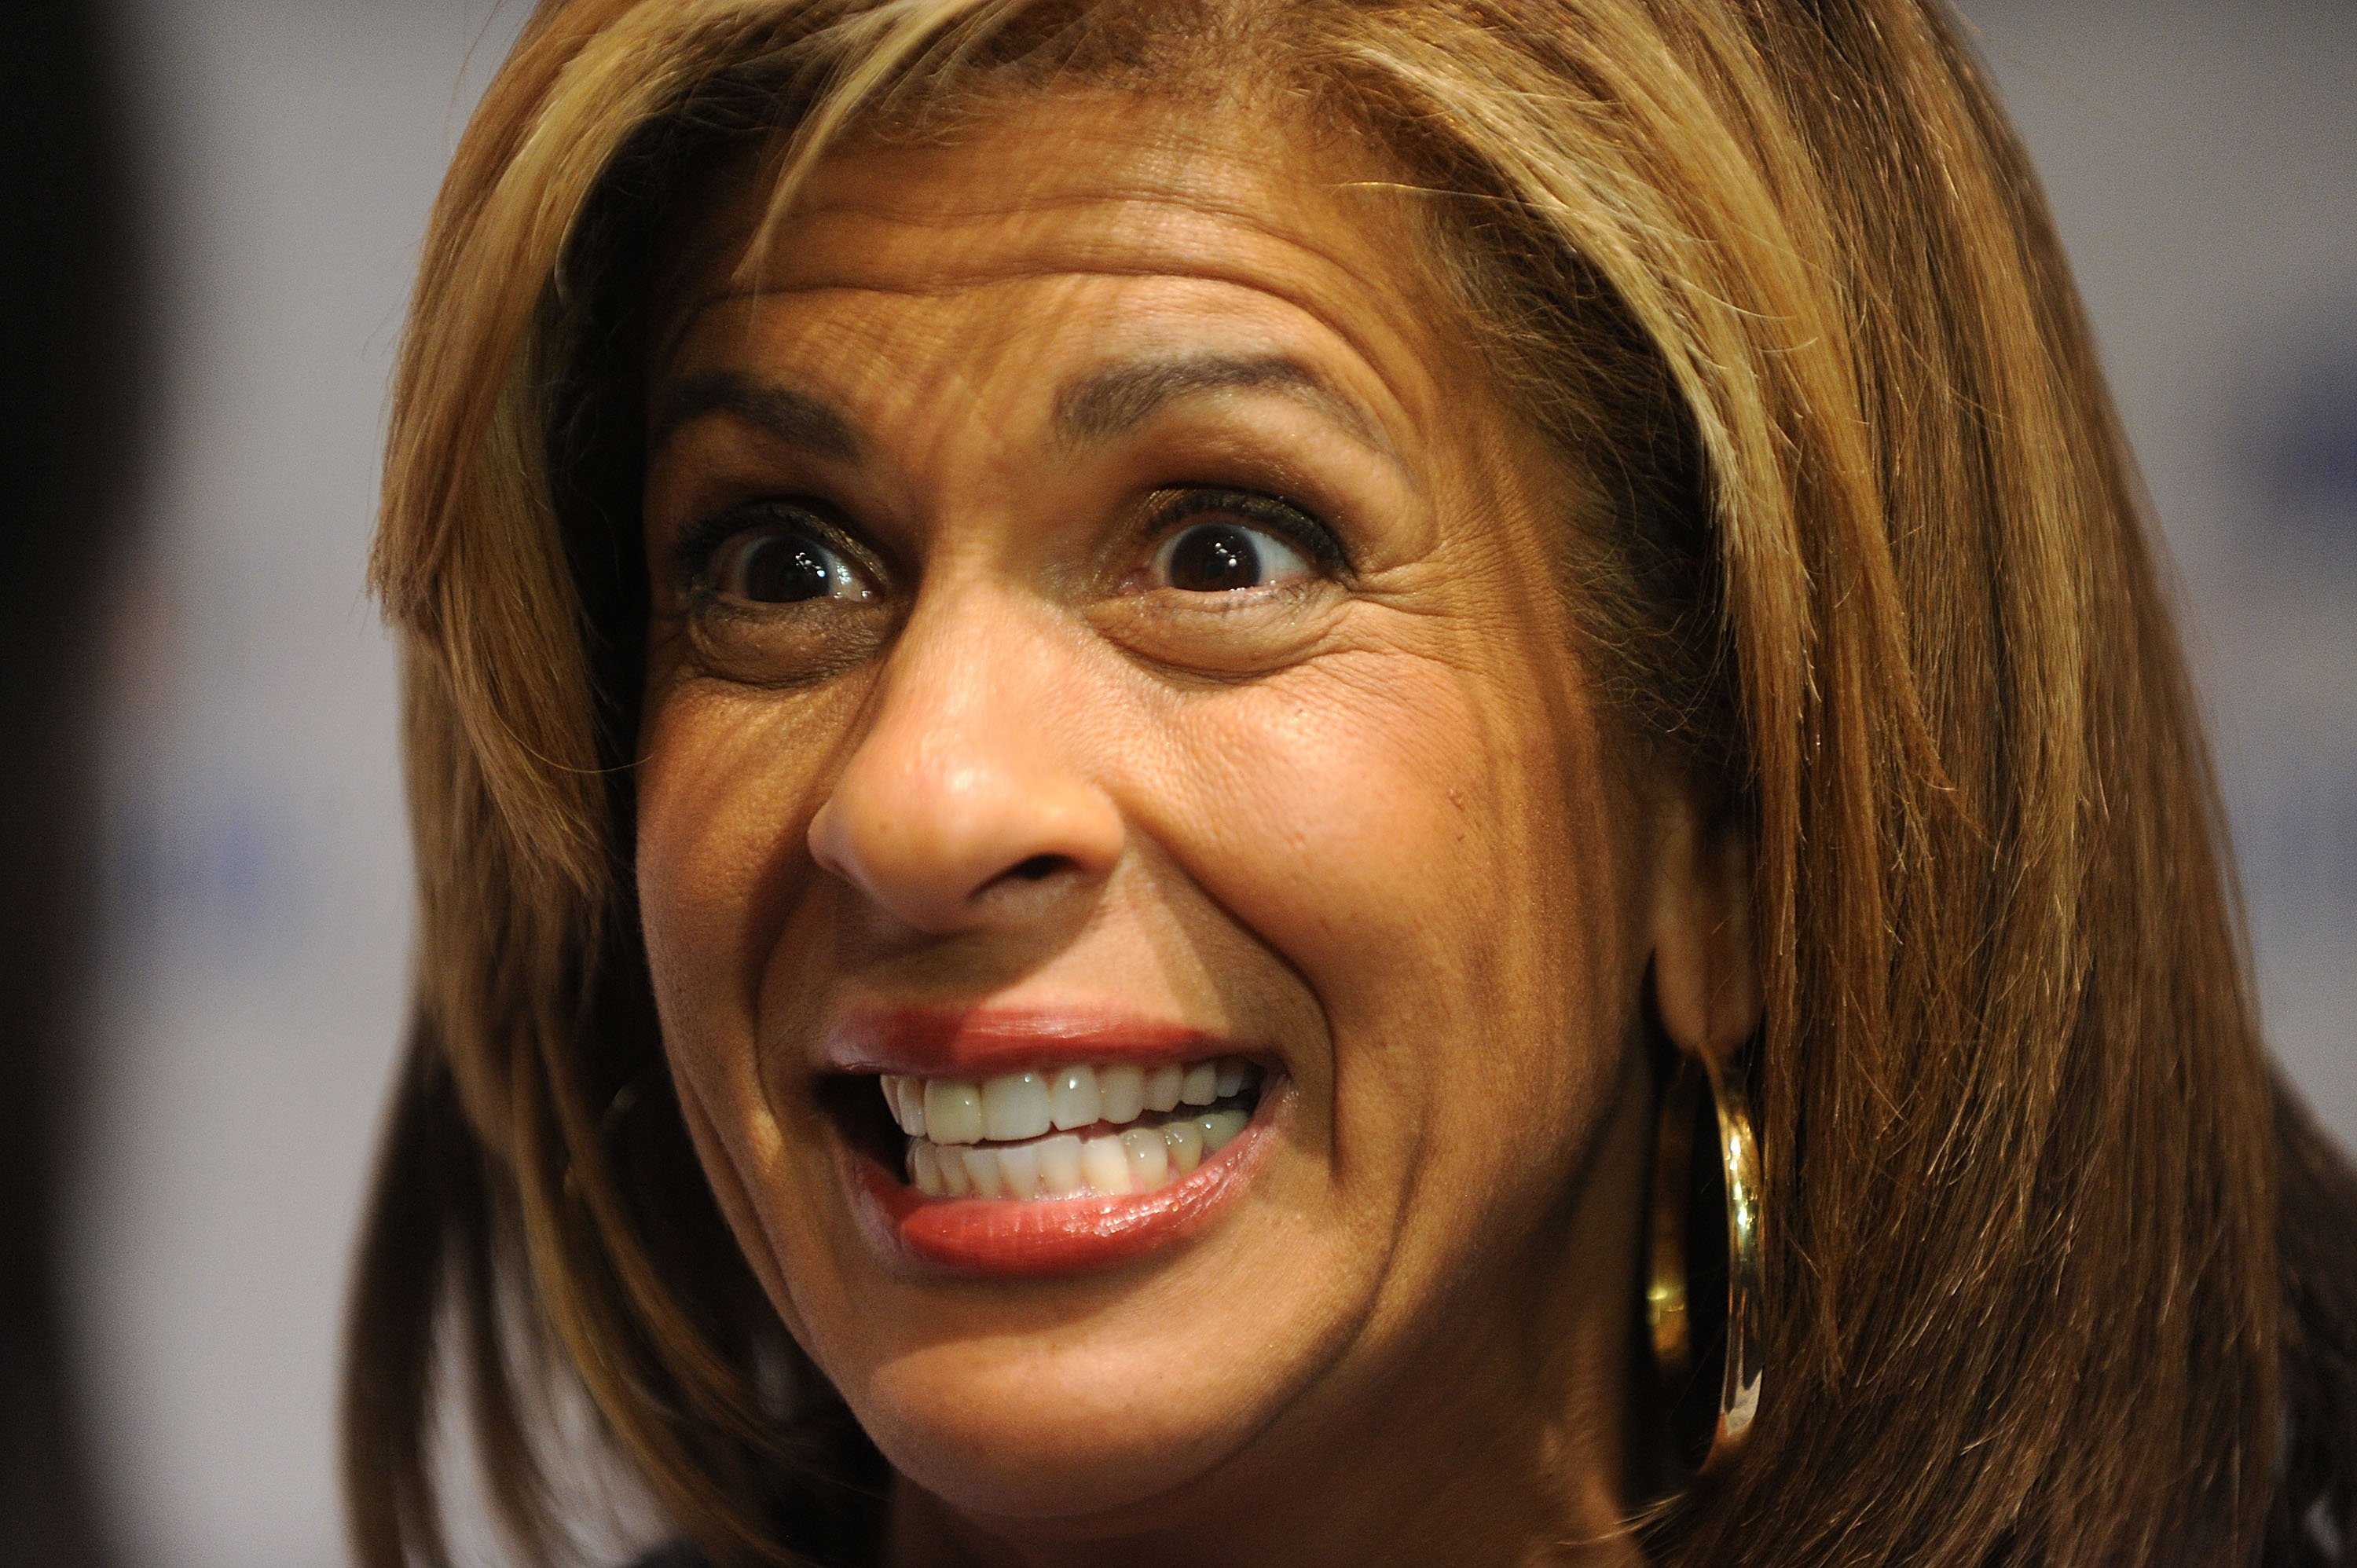 Hoda Kotb at Radio City Music Hall in New York | Source: Getty Images